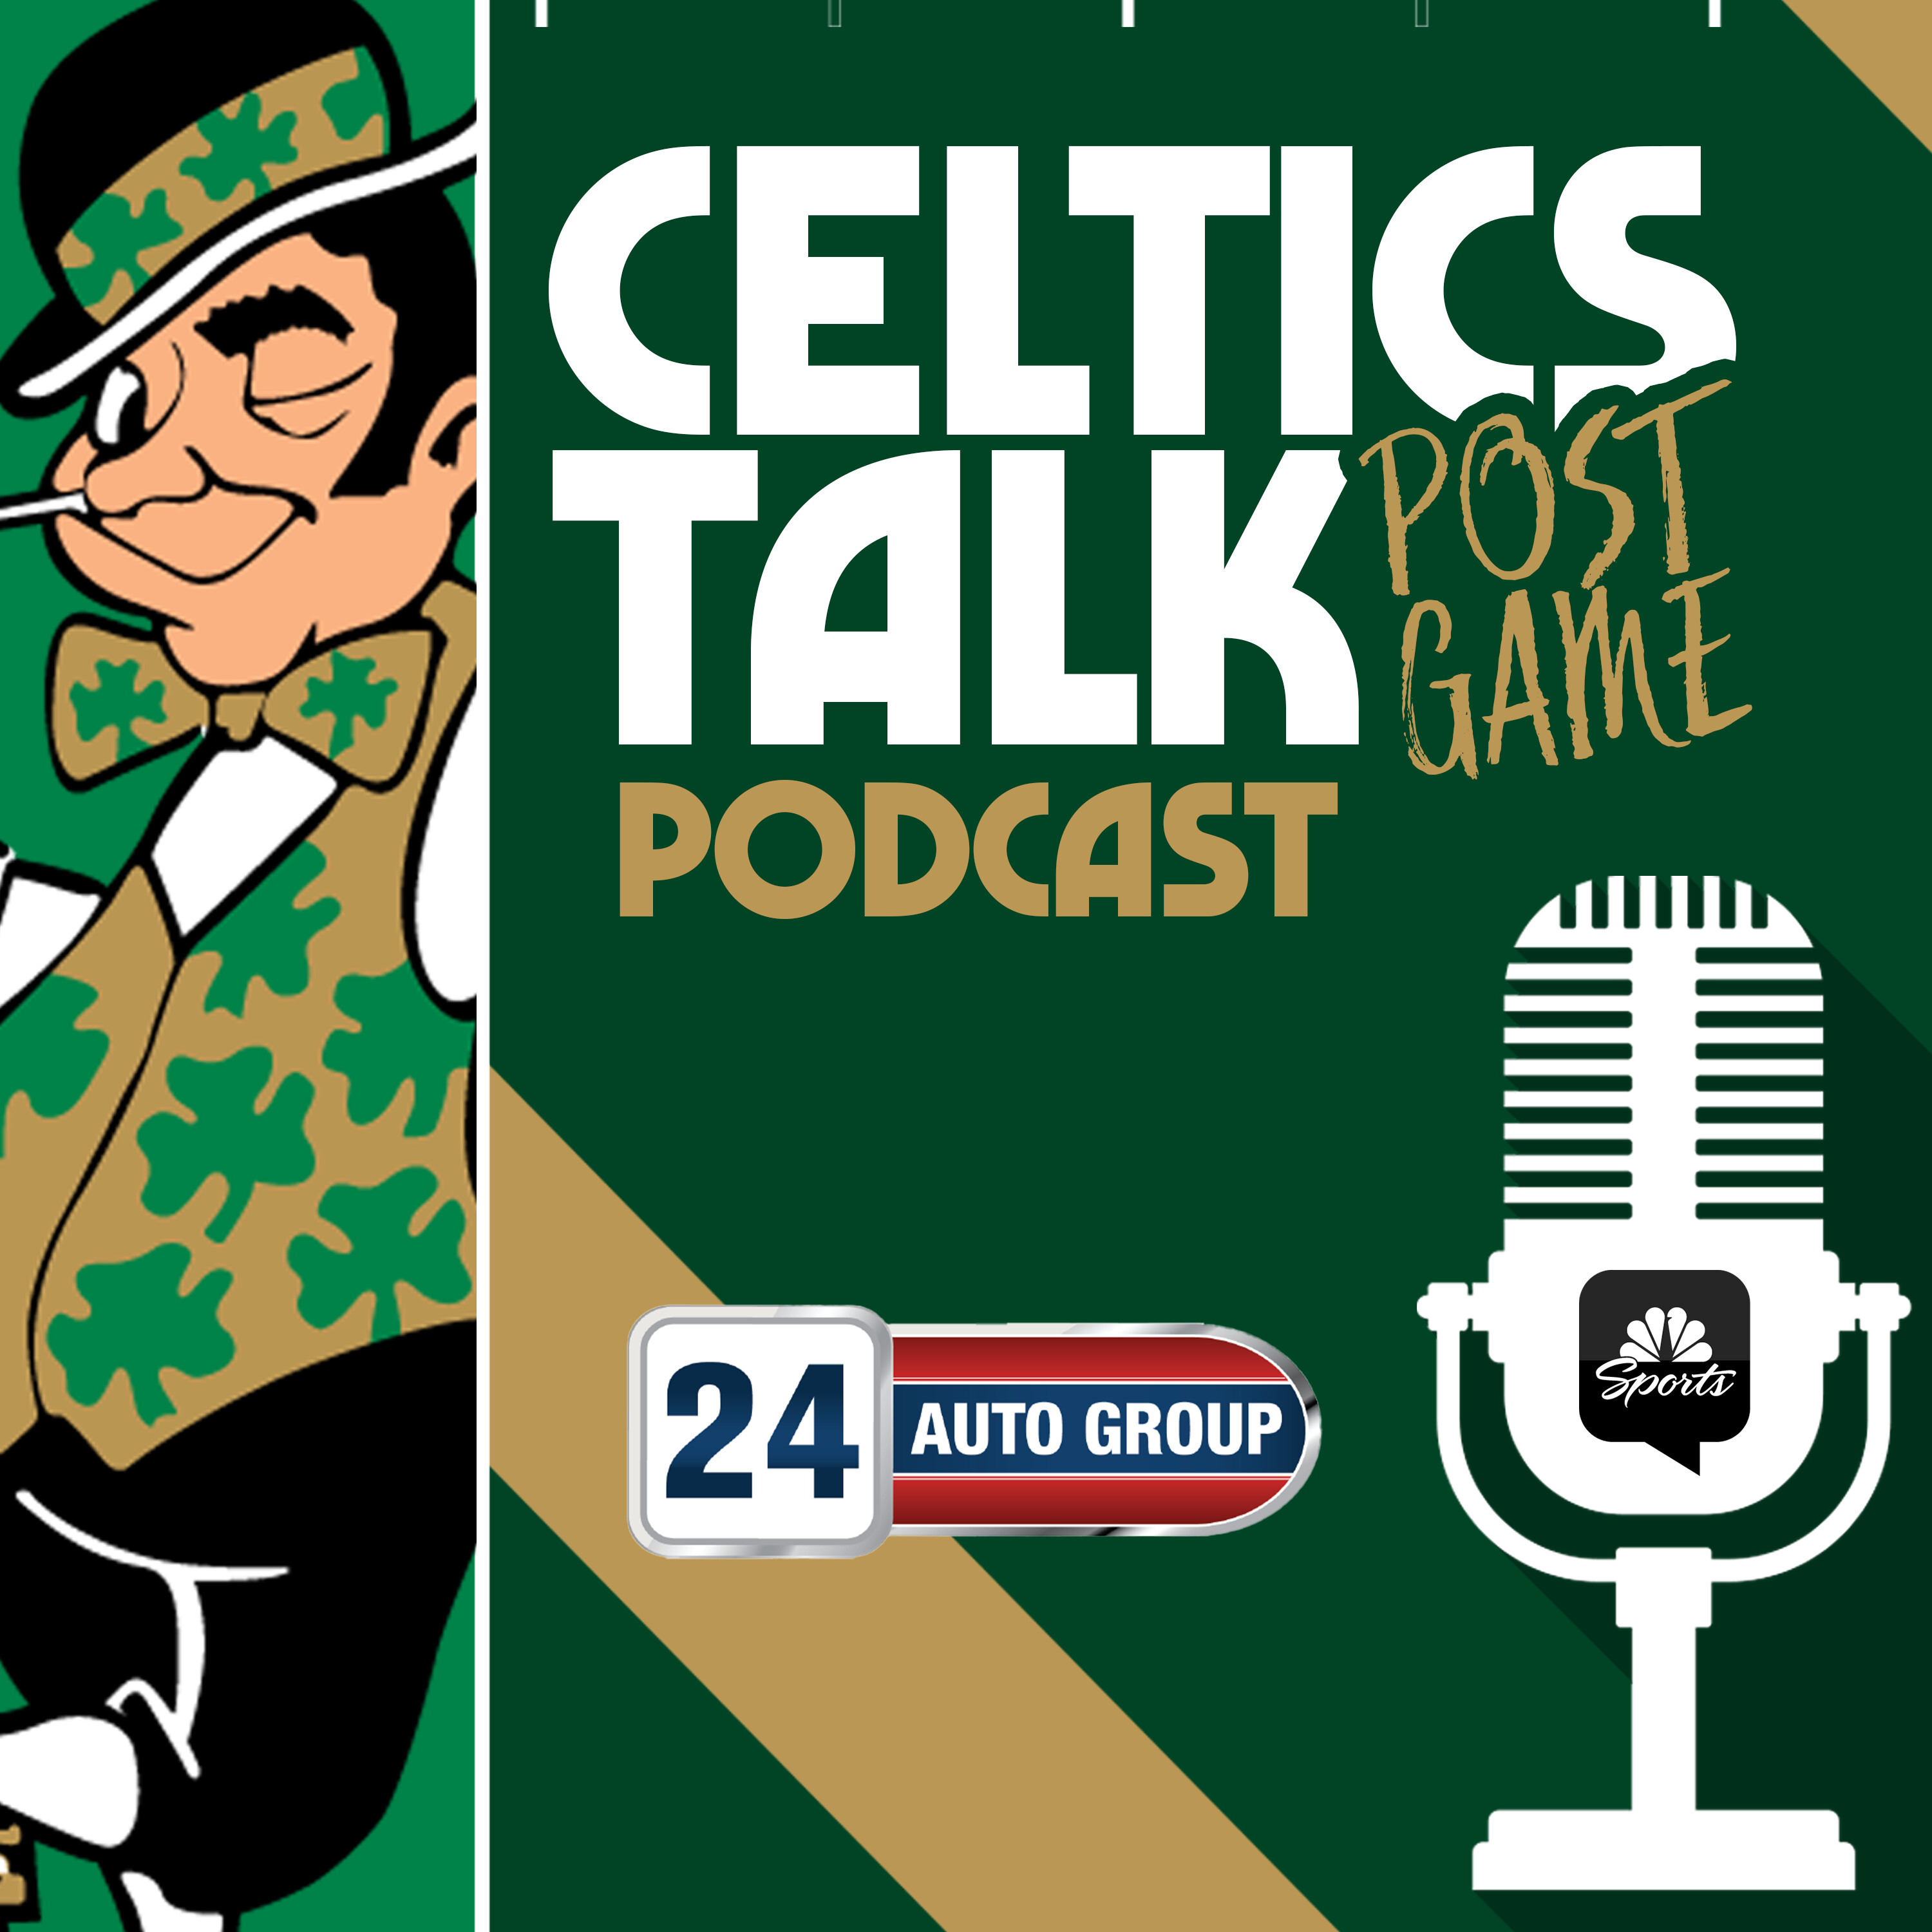 POSTGAME POD: Jayson Tatum ejected in all-around frustrating night for C's in loss to Knicks